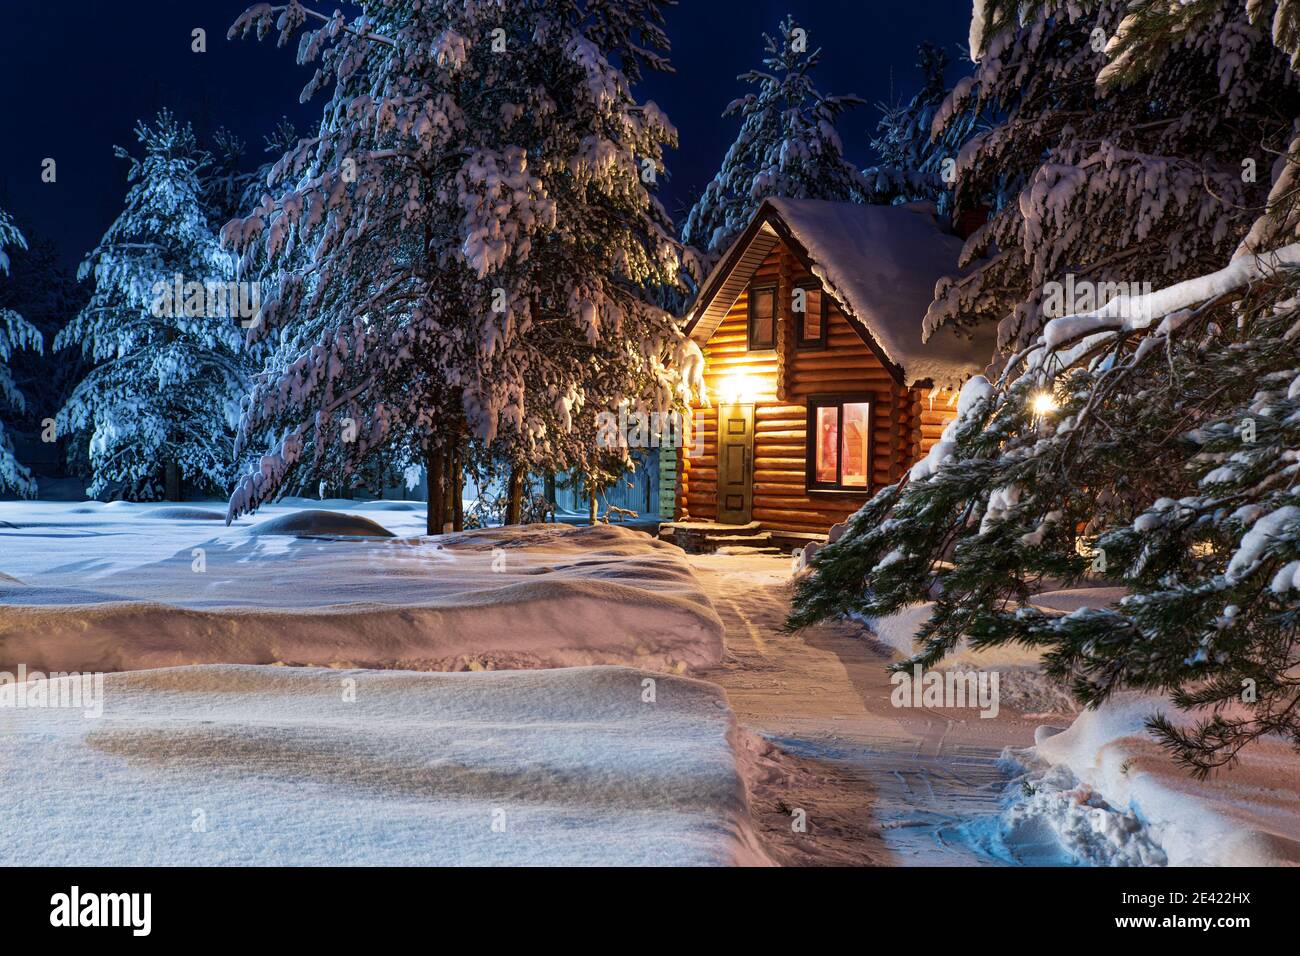 Rustic log house, snow-covered pine trees, big snowdrifts, fabulous winter night Stock Photo